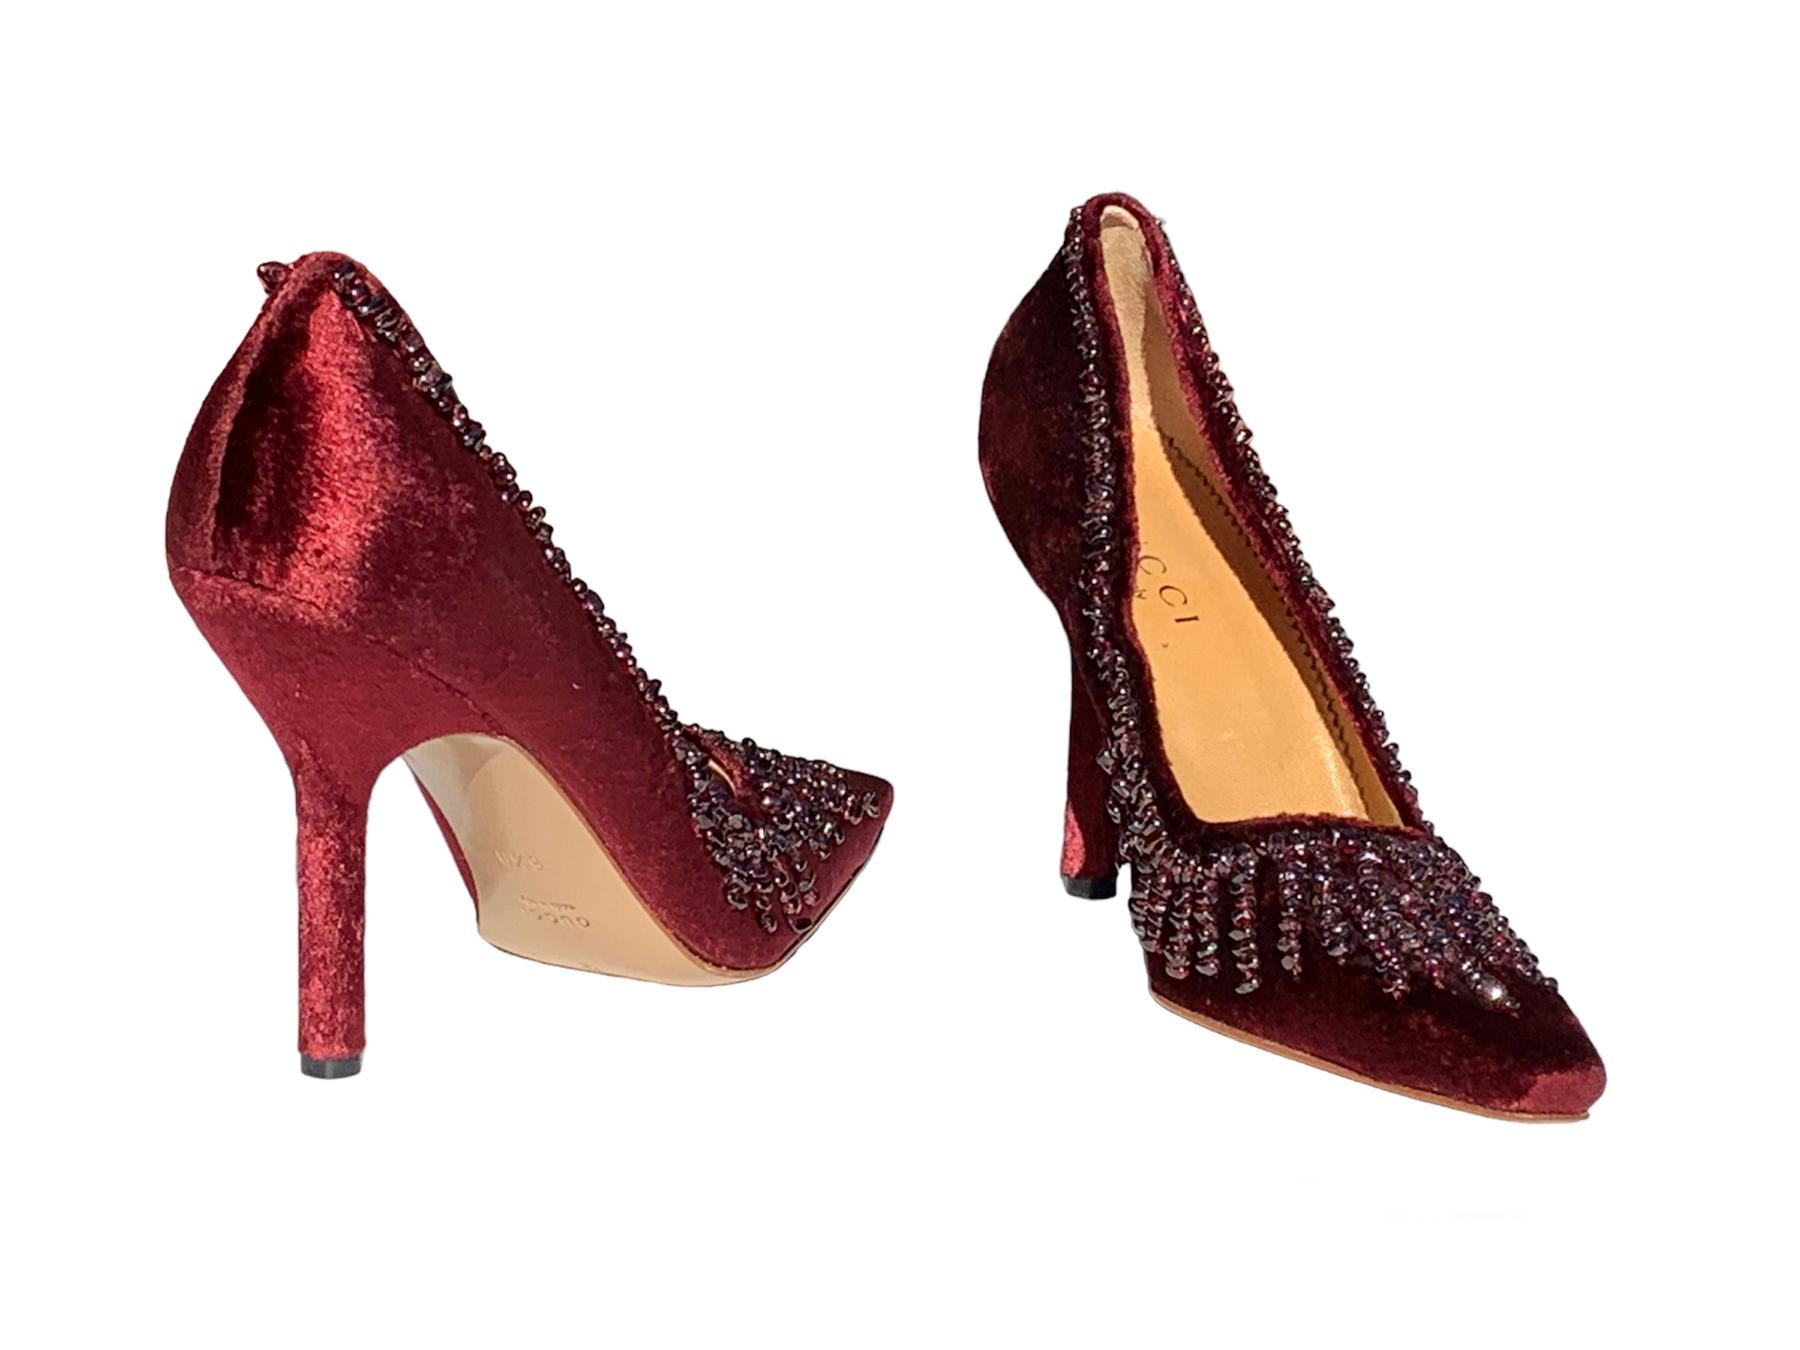 New Tom Ford for Gucci S/S 1999 Burgundy Velvet Onyx Embellished Pumps 36.5  6.5 In New Condition For Sale In Montgomery, TX